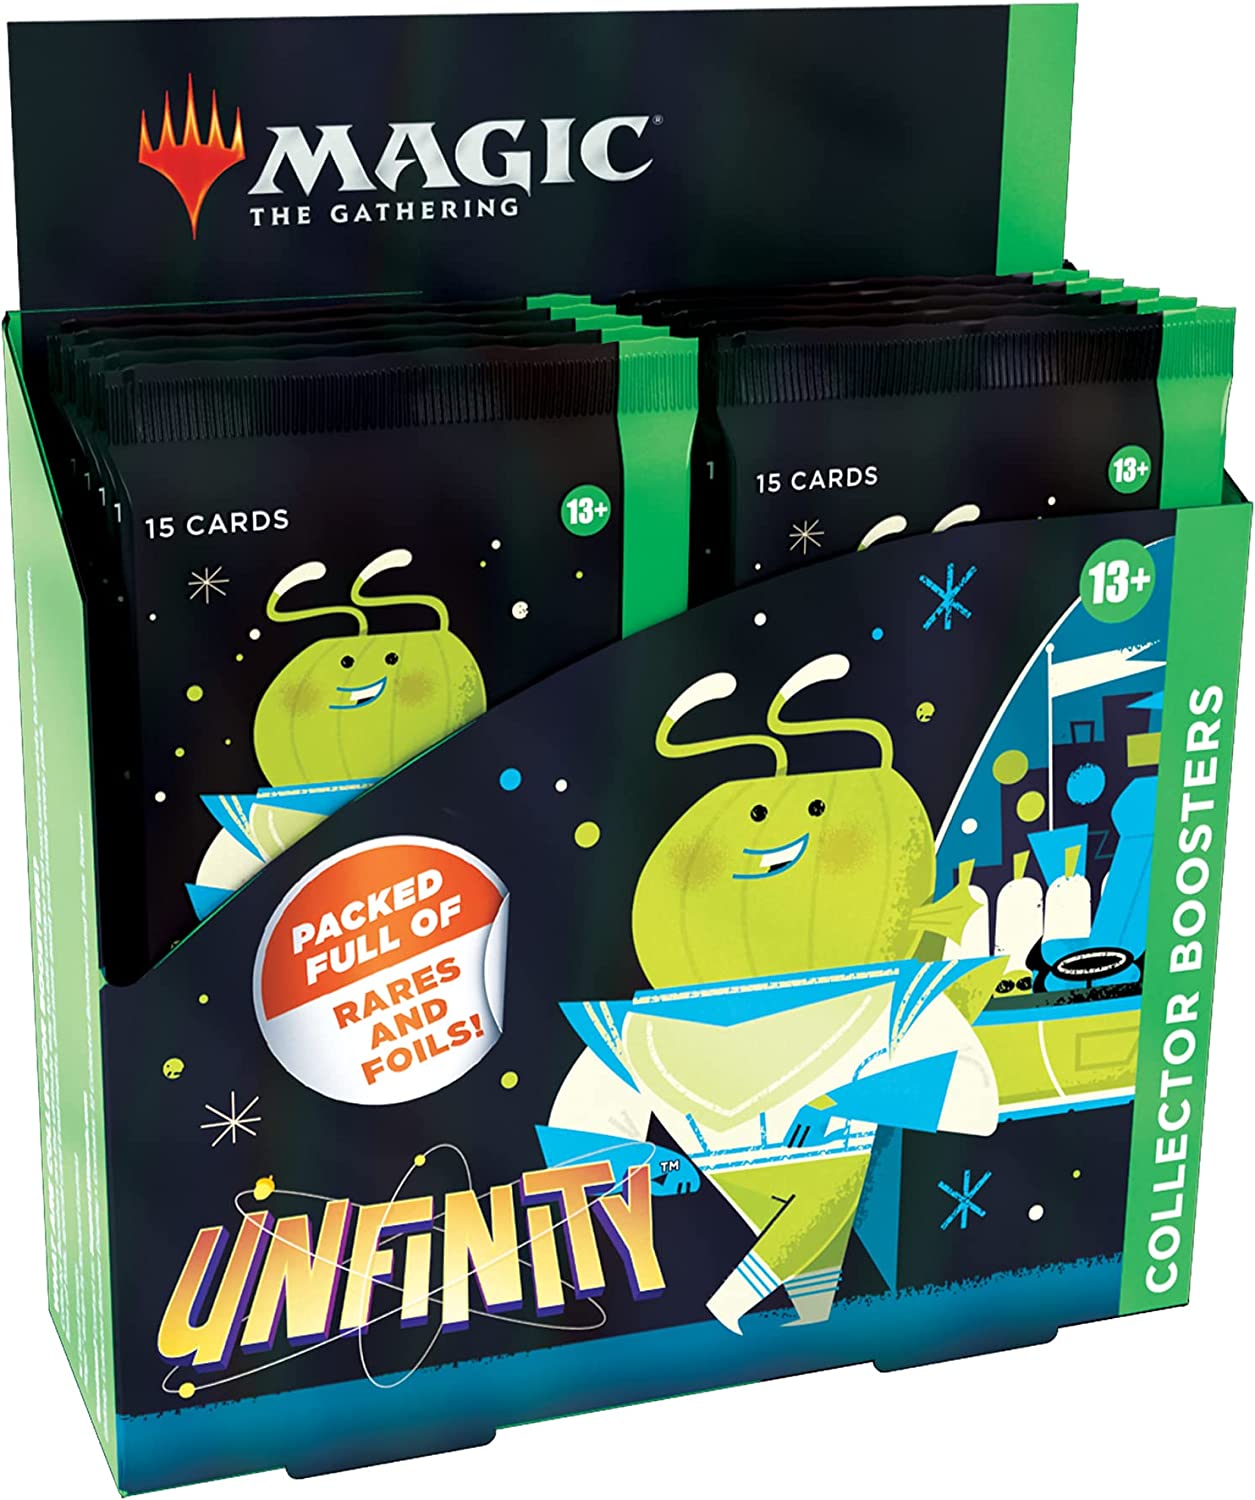 Magic: The Gathering Collector Booster Box Case - Unfinity (Case of 6)